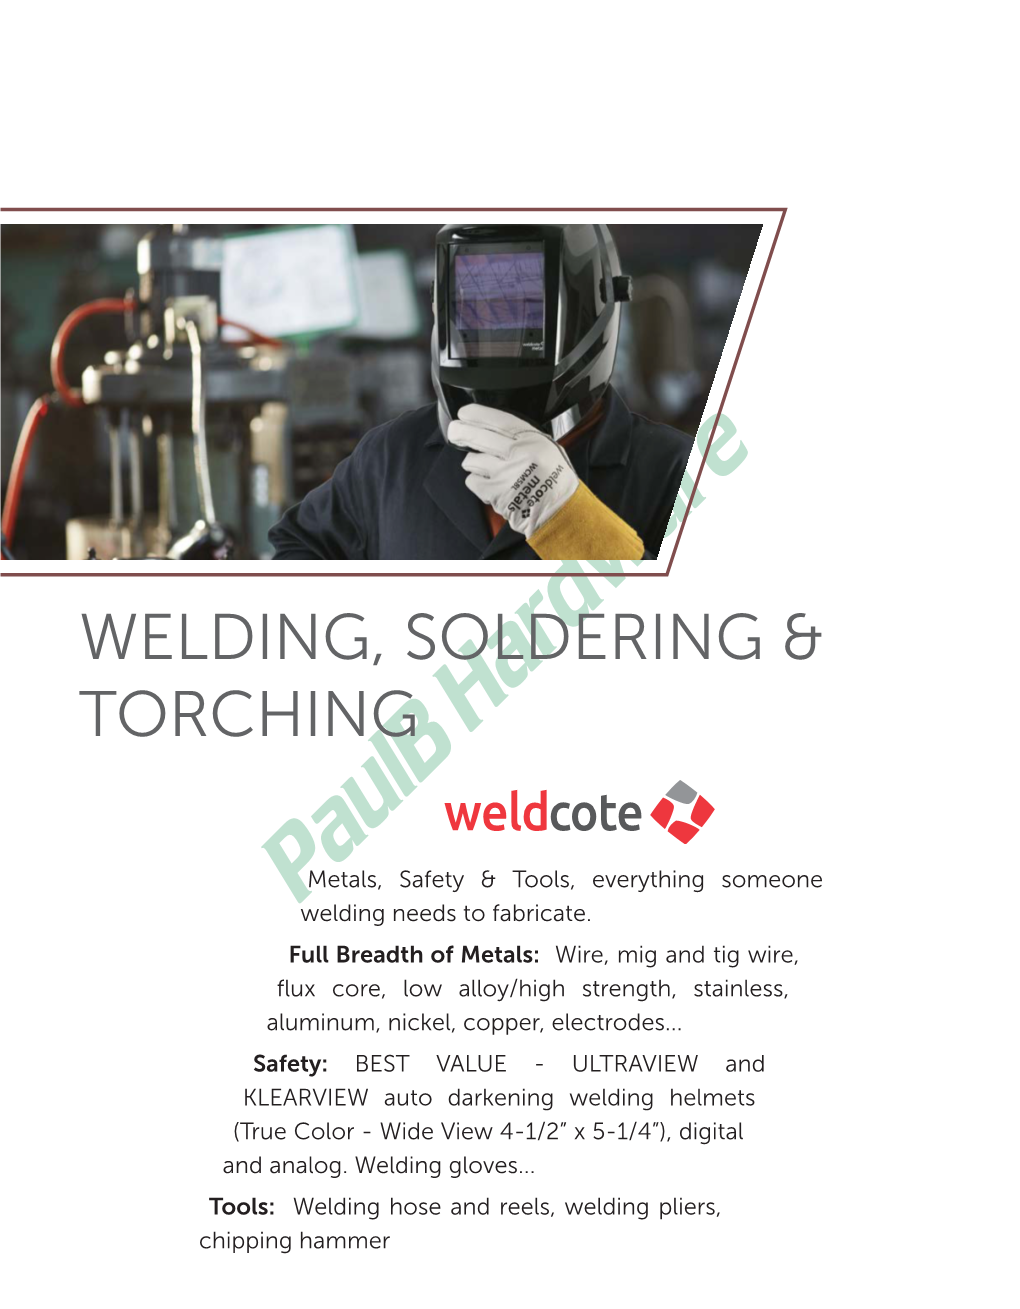 Welding, Torching and Soldering